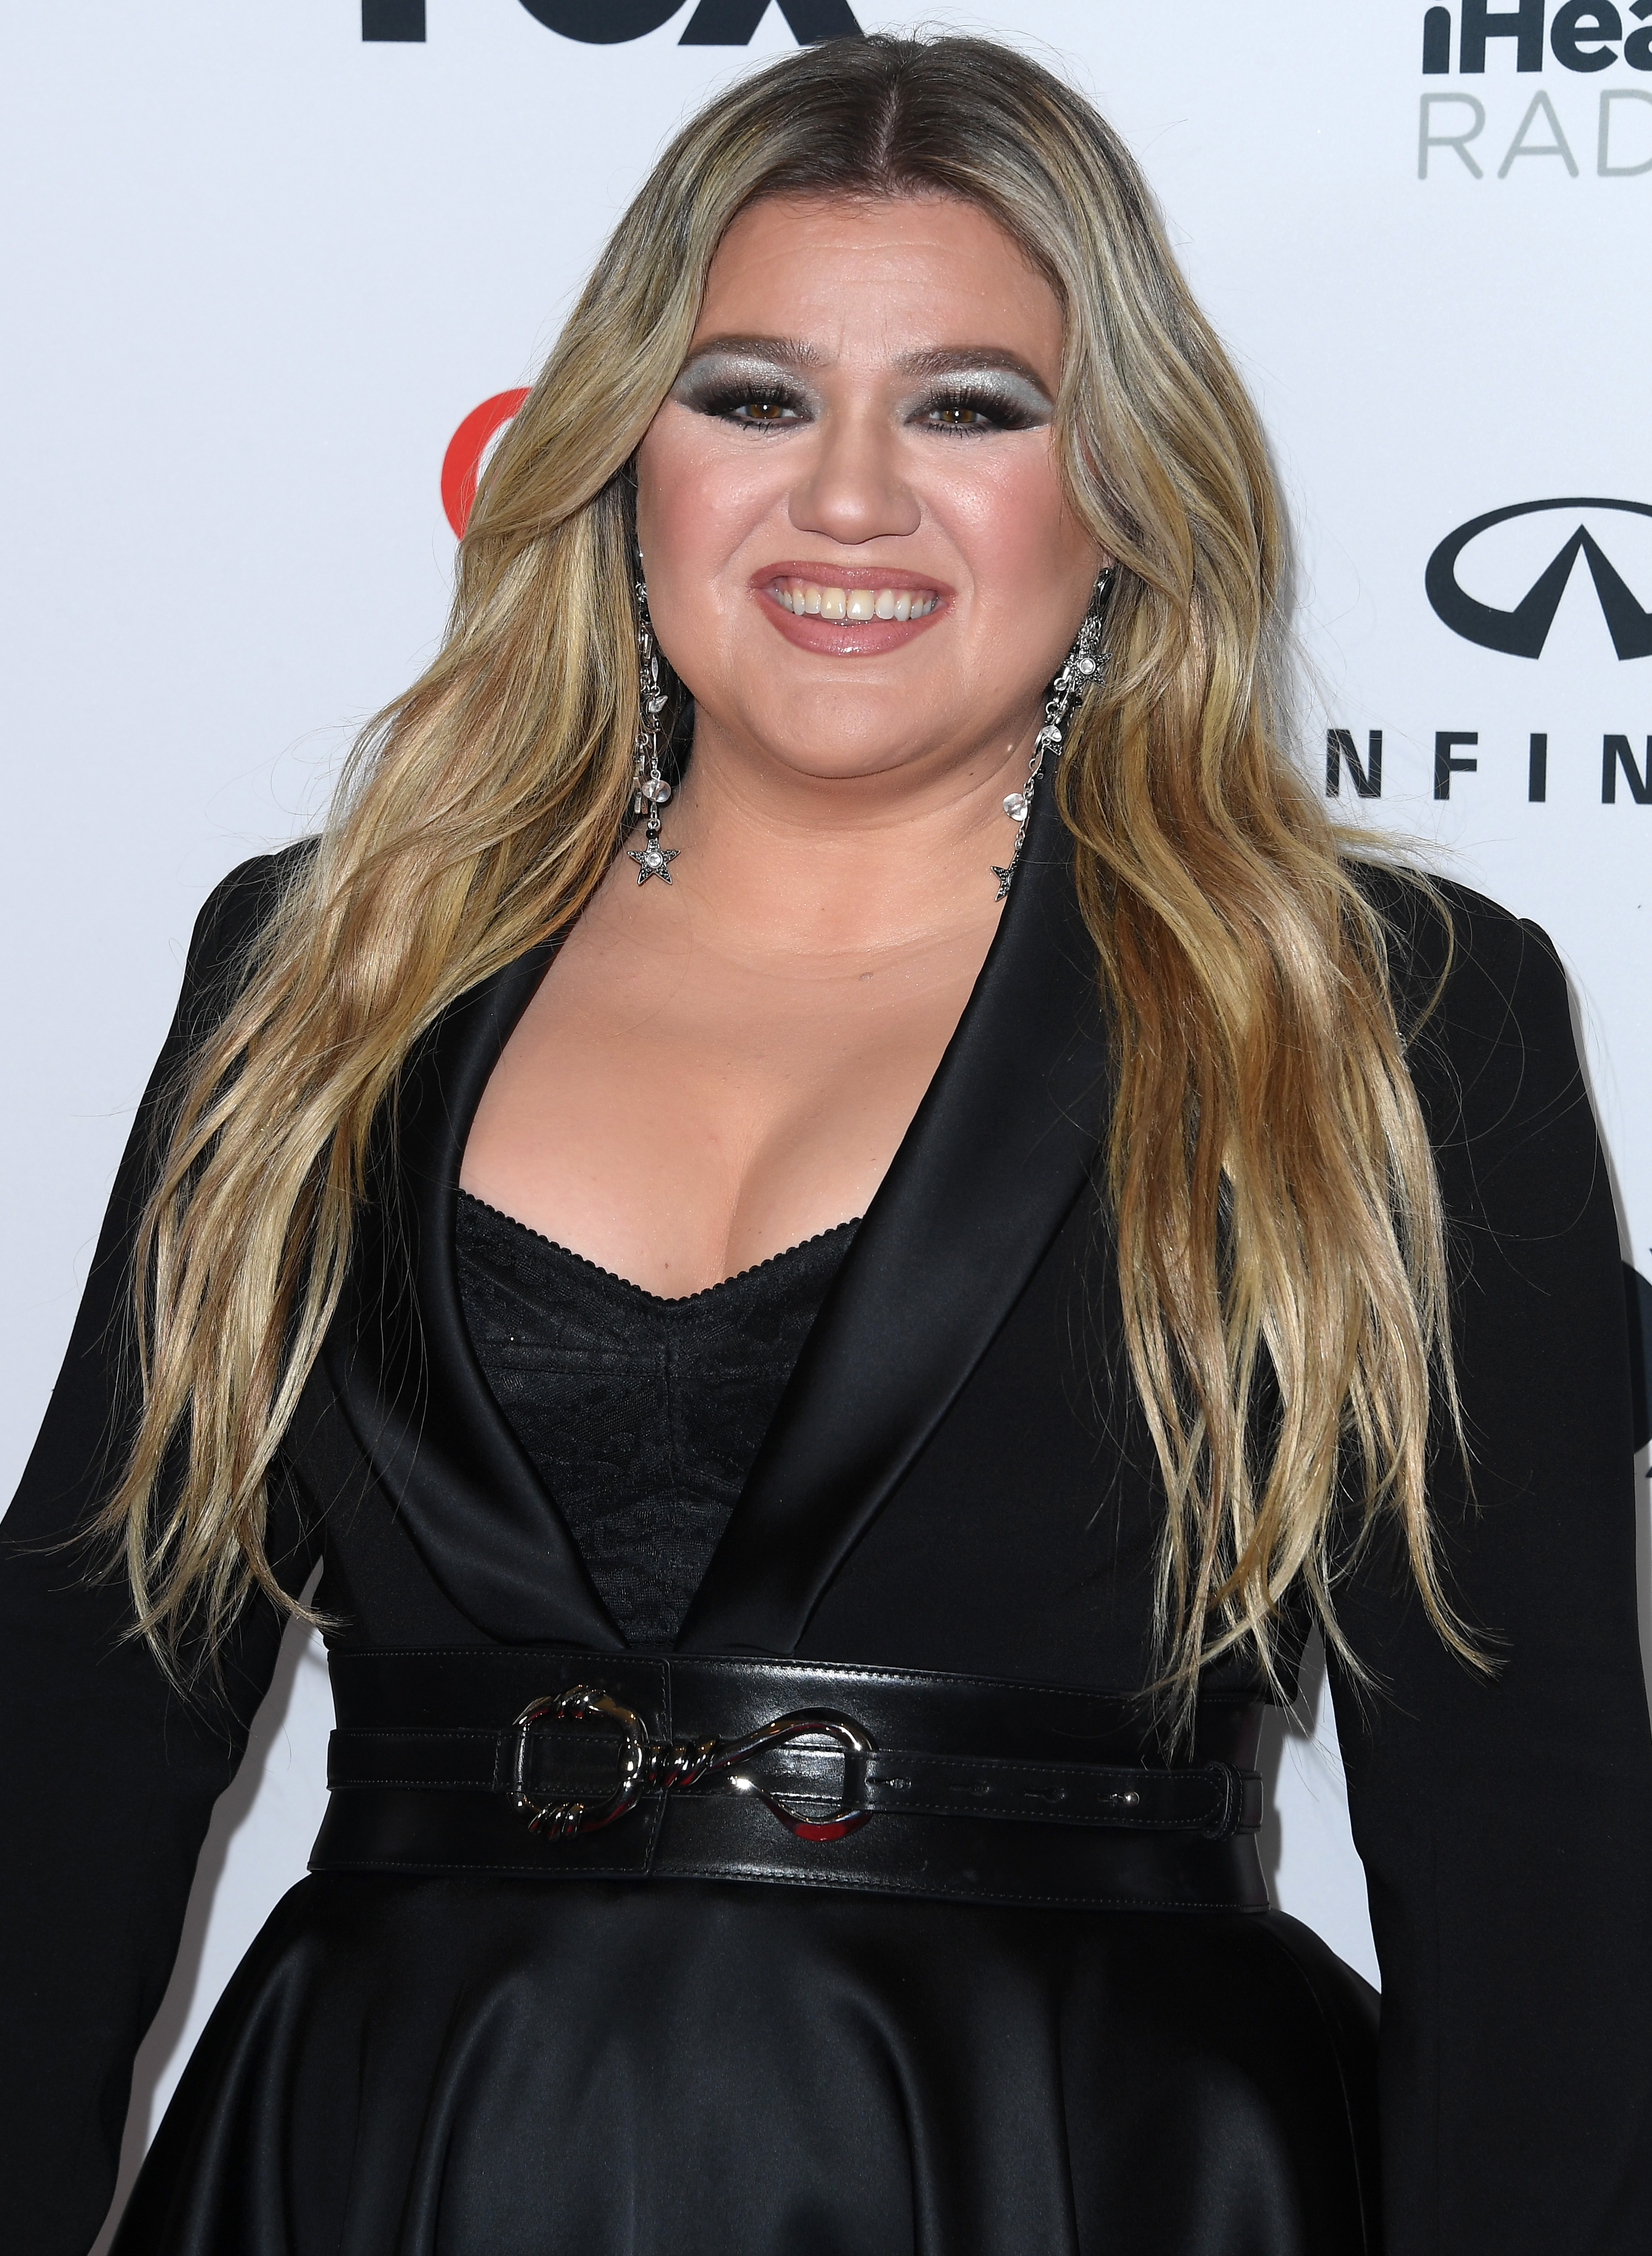 Kelly Clarkson poses at the 2023 iHeartRadio Music Awards on March 27, 2023 in Hollywood, California. | Source: Getty Images